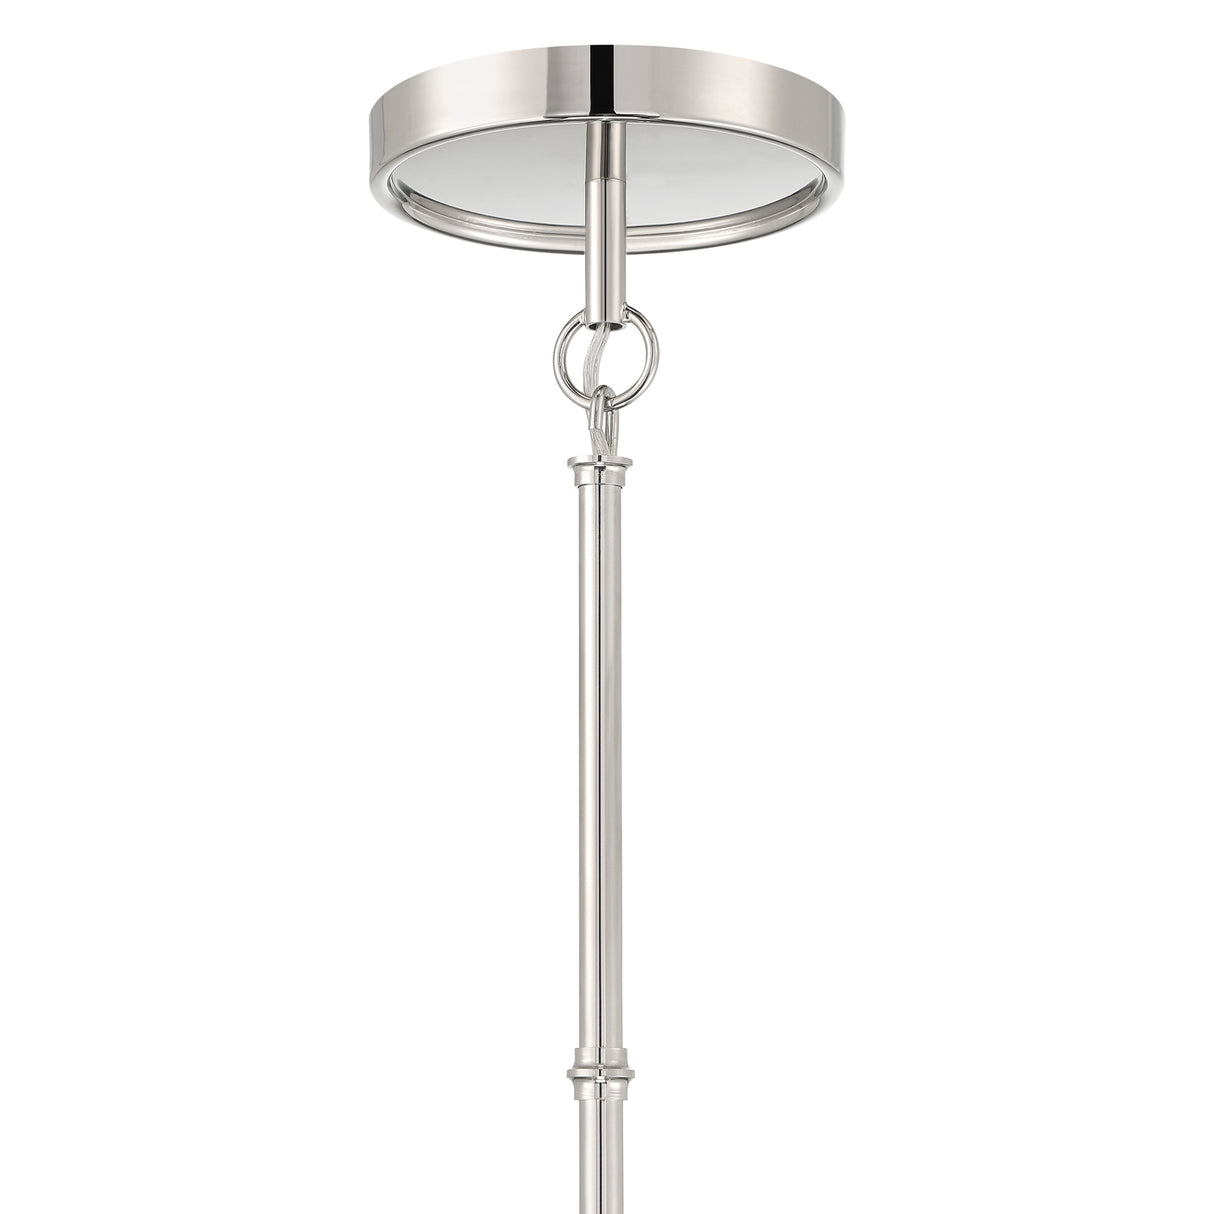 Luca Large 18" Conical Pendant, Polished Nickel